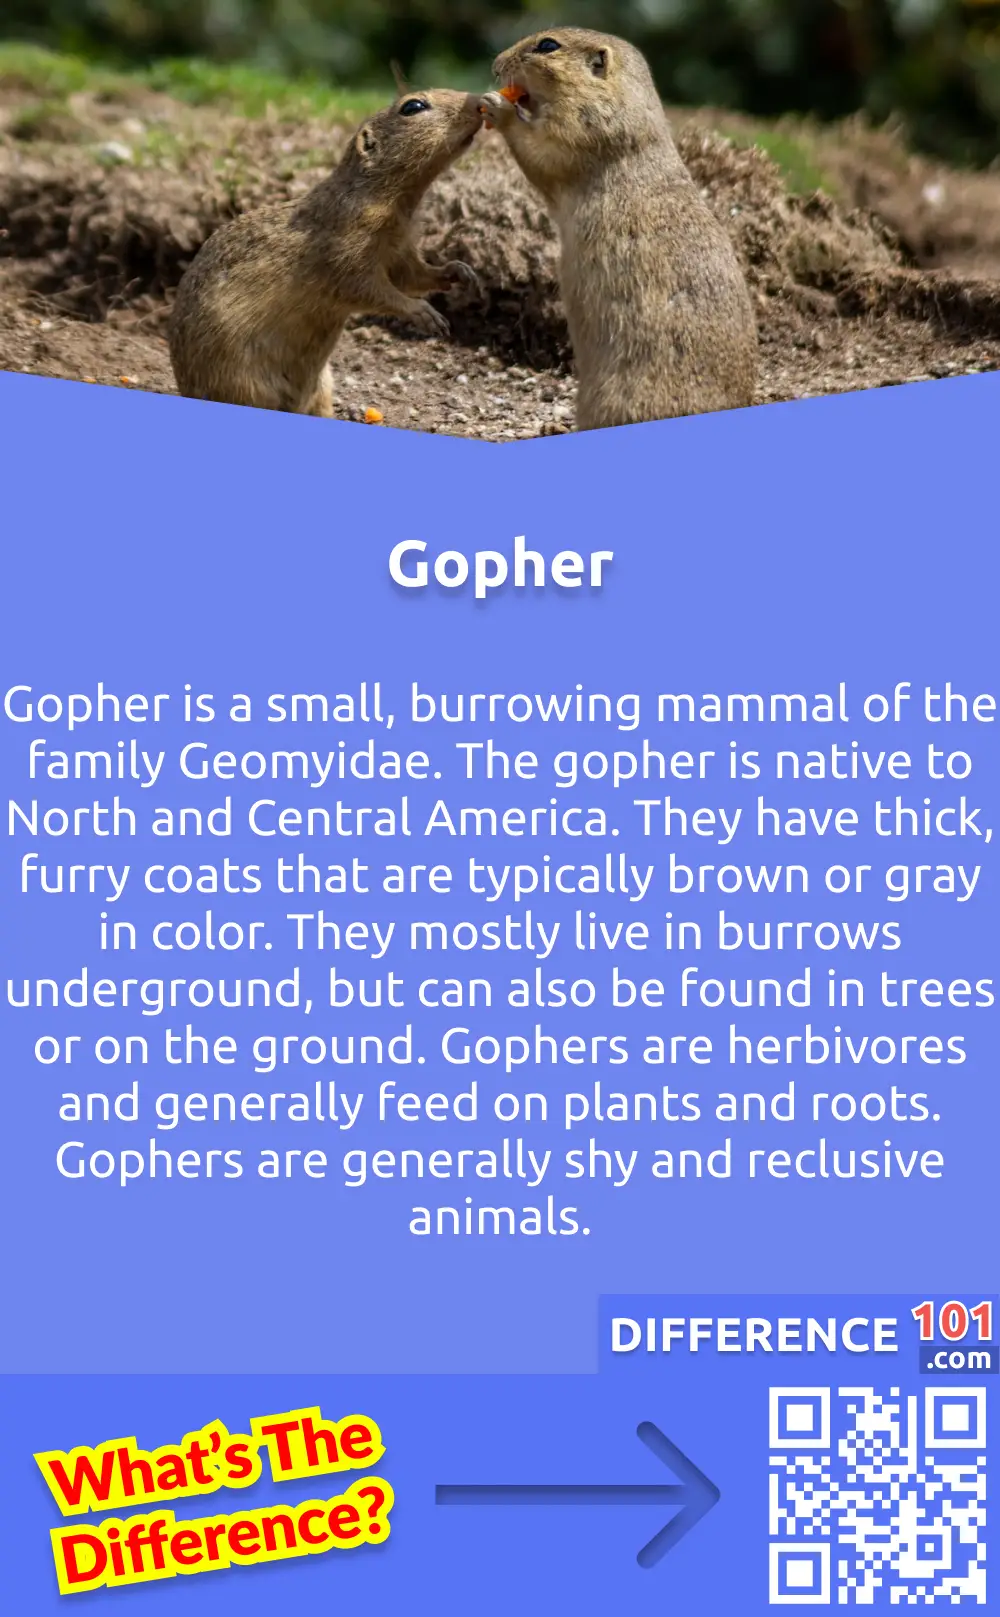 What Is Gopher? Gopher is a small, burrowing mammal of the family Geomyidae. The gopher is native to North and Central America. They have thick, furry coats that are typically brown or gray in color. They mostly live in burrows underground, but can also be found in trees or on the ground. Gophers are herbivores and generally feed on plants and roots. Gophers are generally shy and reclusive animals. They are also considered to be pests by many people because of their habit of digging holes in yards and gardens. Gophers also are known to carry diseases that can be harmful to humans and other animals.
